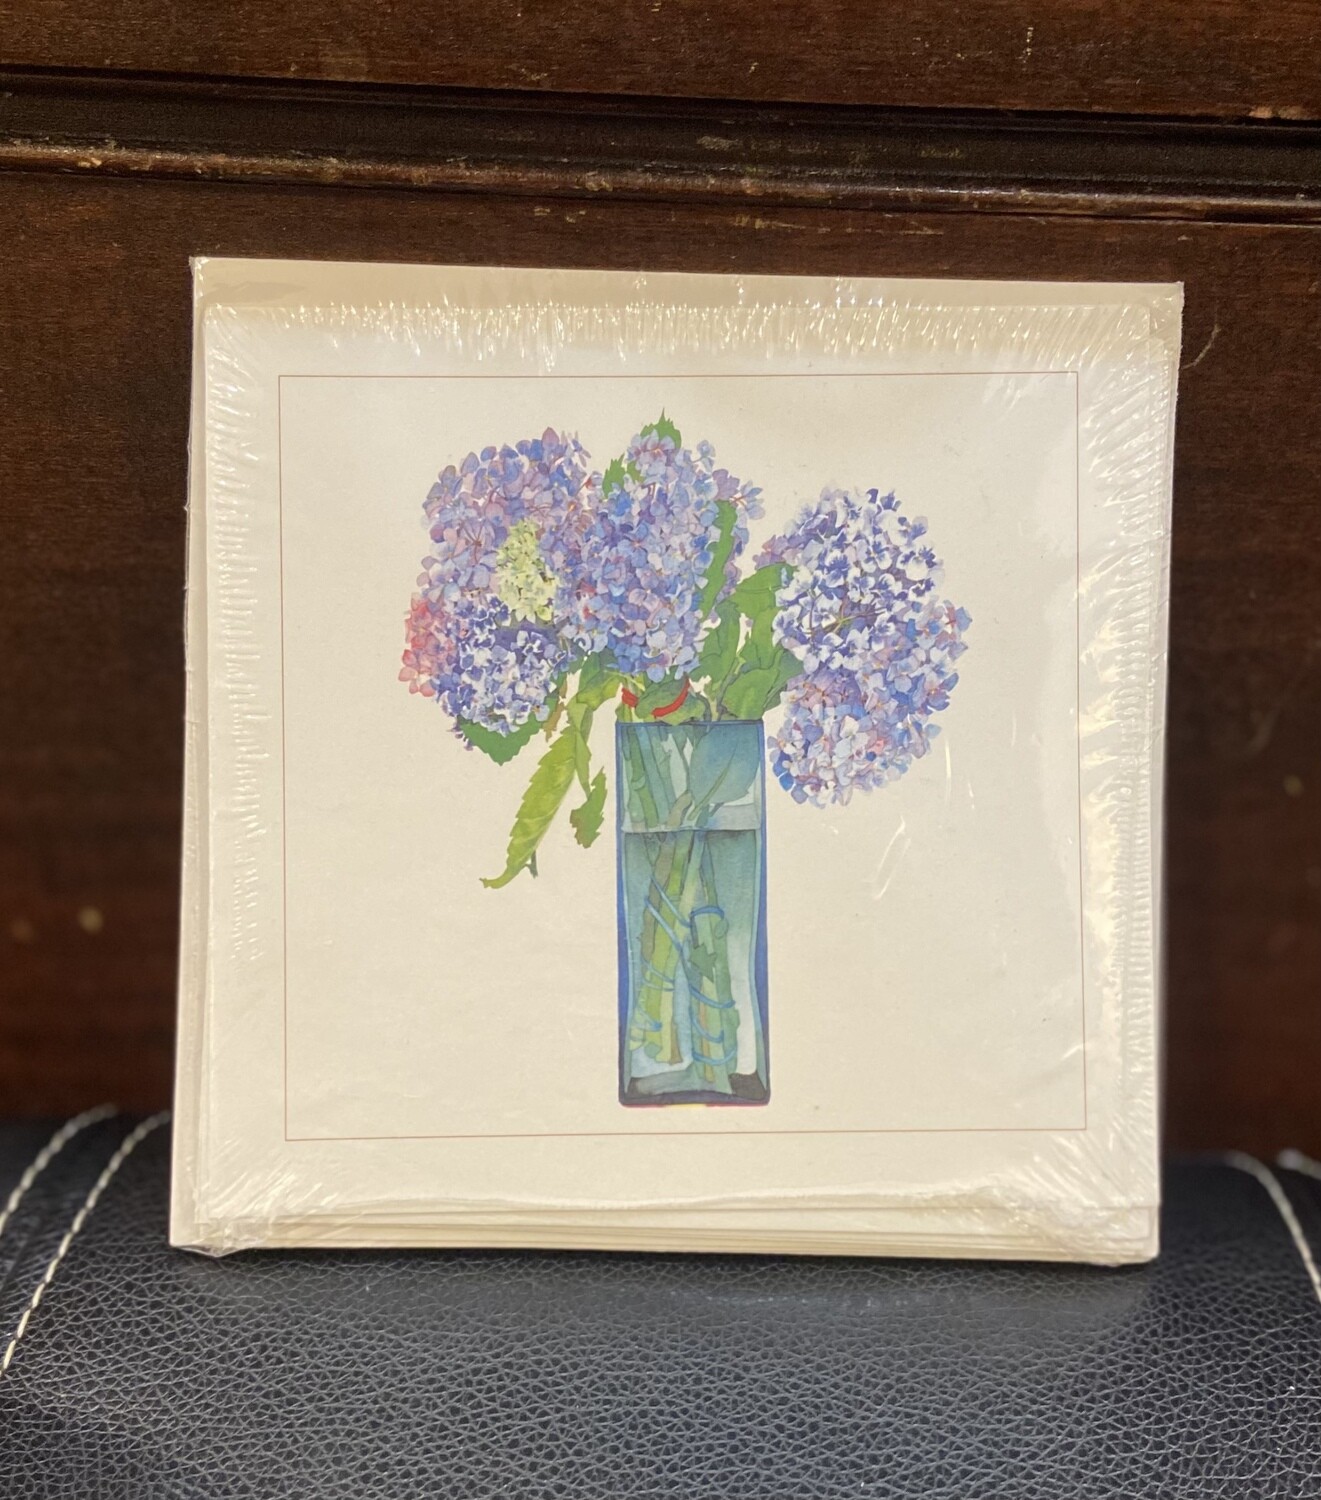 6"x6" Hyacinth Cards and Envelopes, set of 5